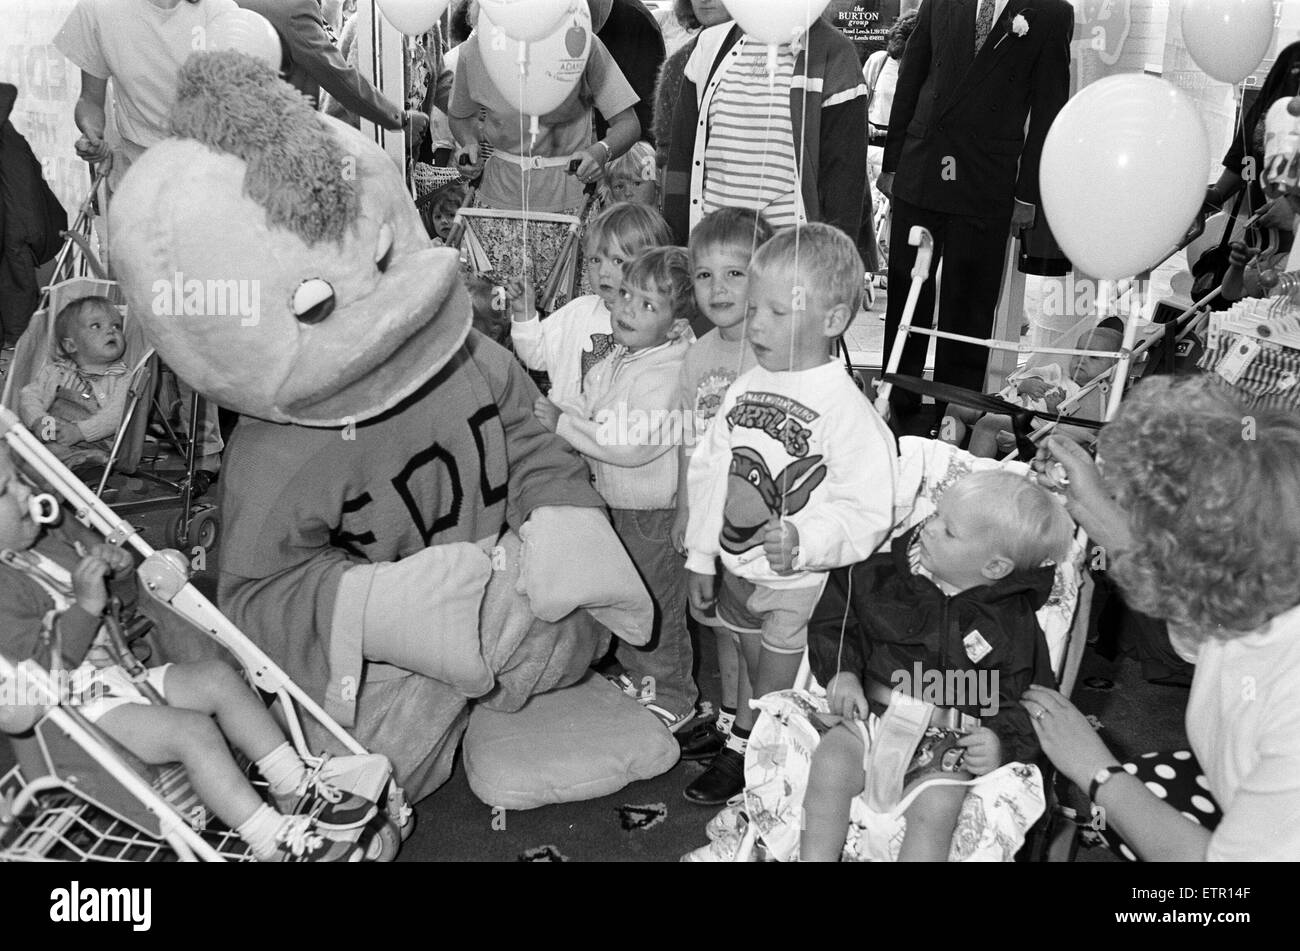 This larger than life version of BBC children's TV personality Edd the Duck visited huddersfield to open a new shop. ÊThe giant Edd-pictured with young customers-helped branch Manager Angela Borley, of Adams children's wear store, new street, open doors for business. 6th September 1991. Stock Photo